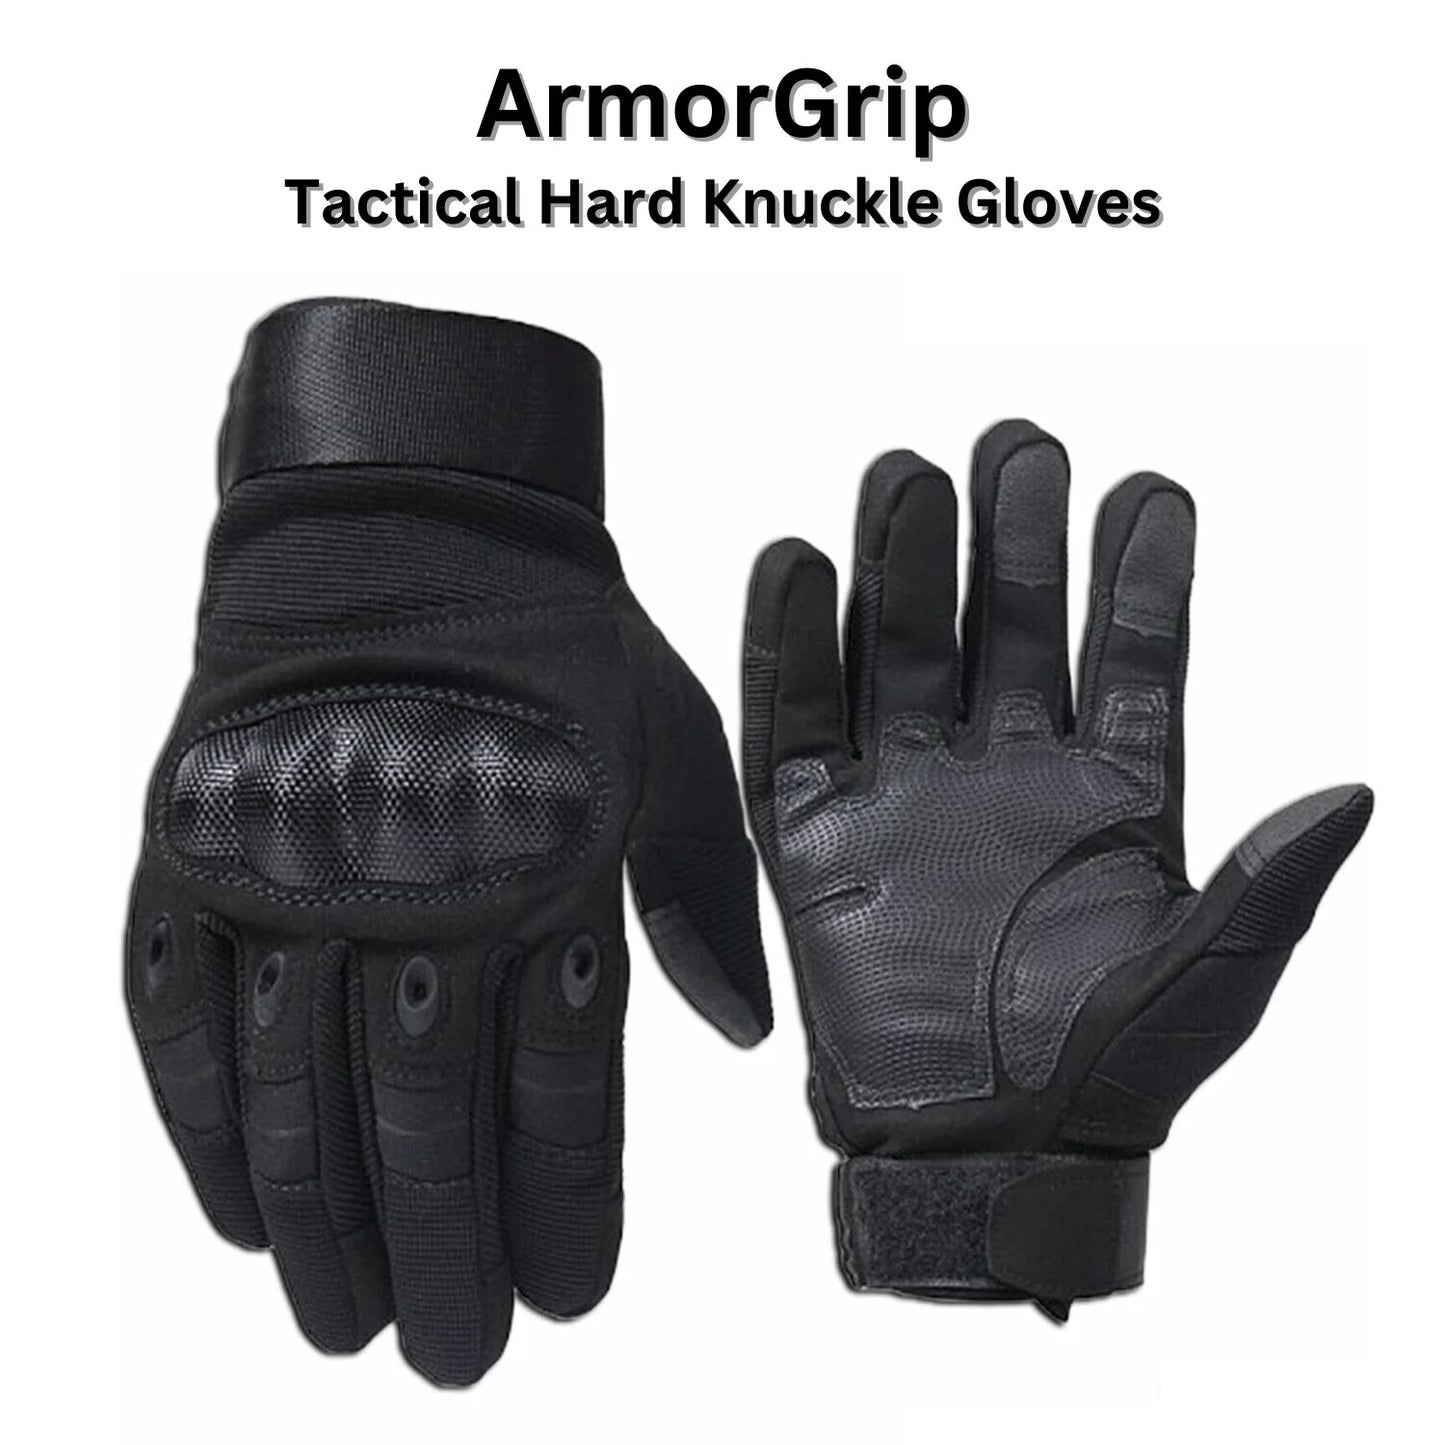 ArmorGrip Tactical Hard Knuckle Gloves